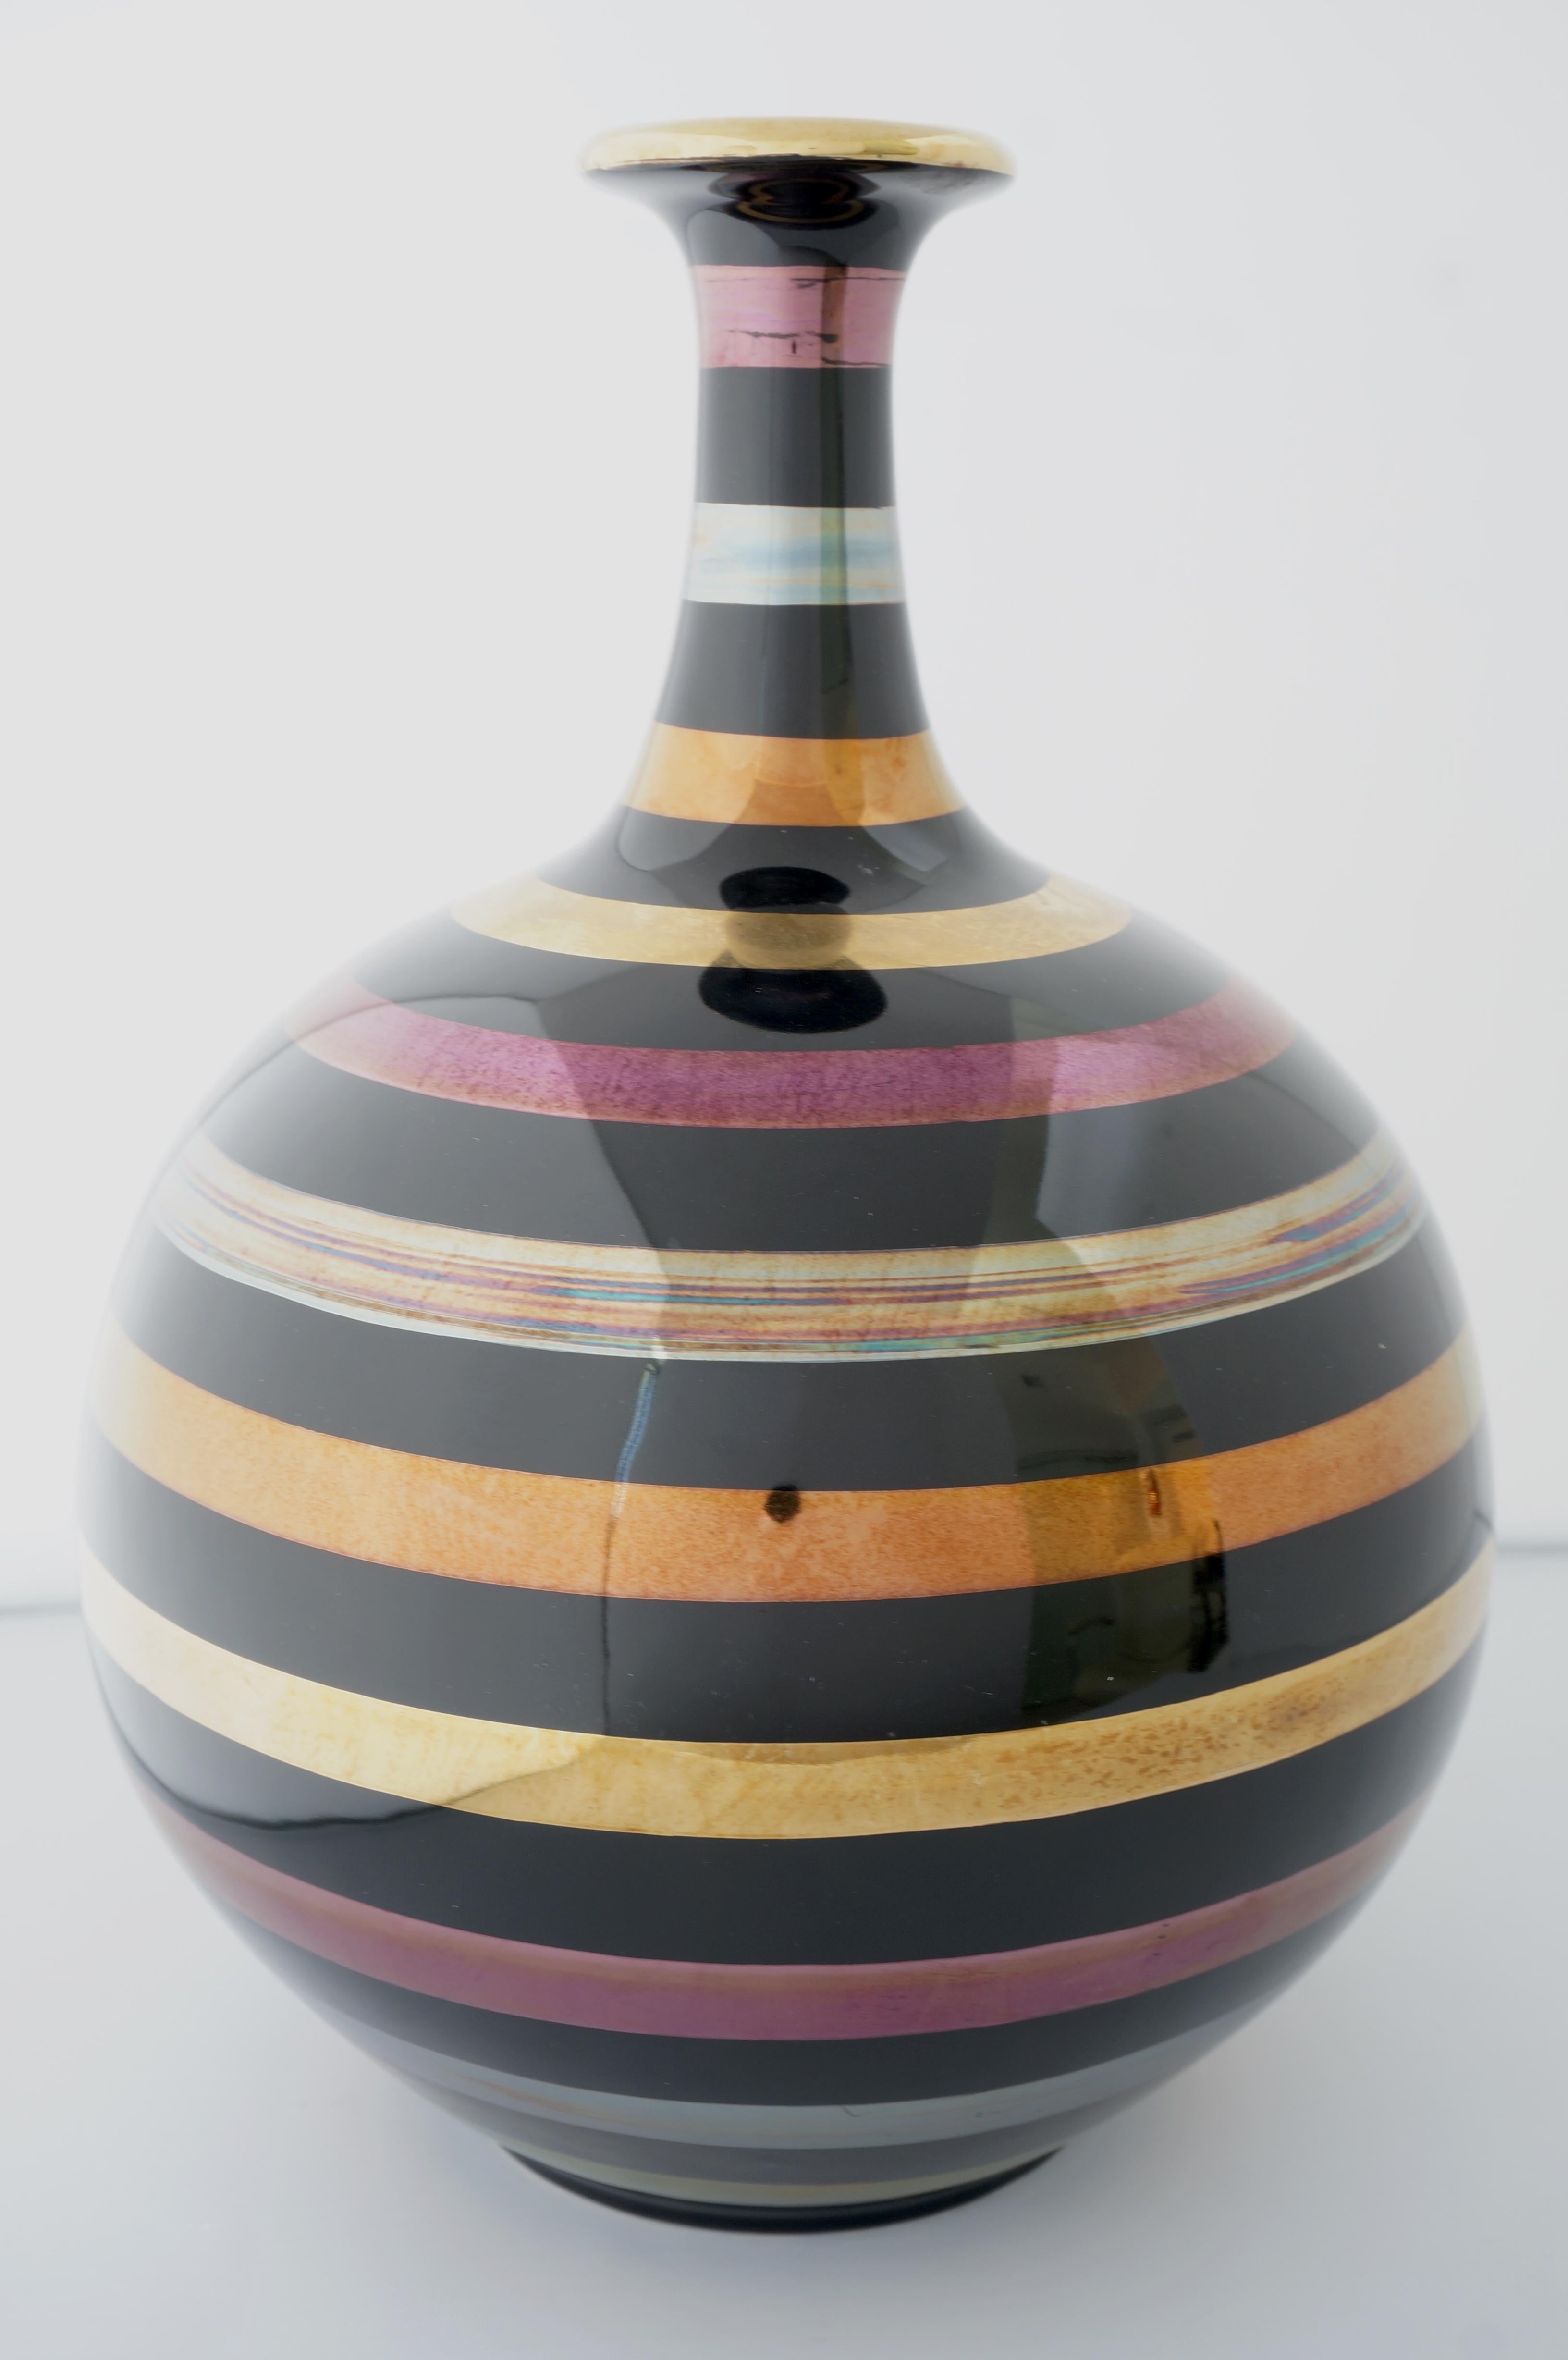 Ecuadorean Glazed Ceramic Vase with Bands of 24k Gold, Silver and Copper For Sale